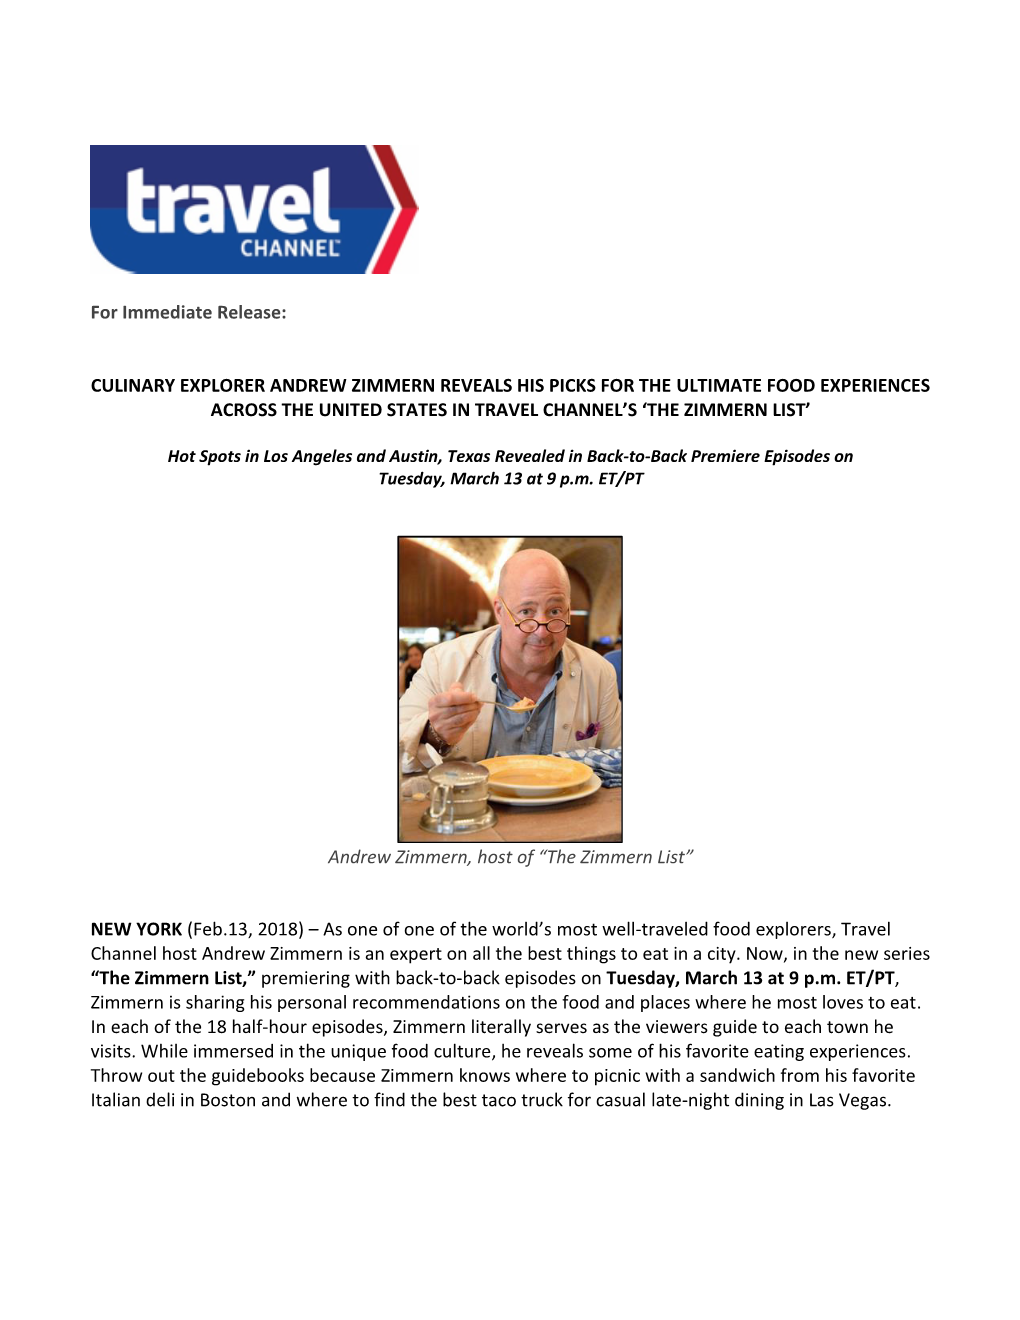 Culinary Explorer Andrew Zimmern Reveals His Picks for the Ultimate Food Experiences Across the United States in Travel Channel’S ‘The Zimmern List’